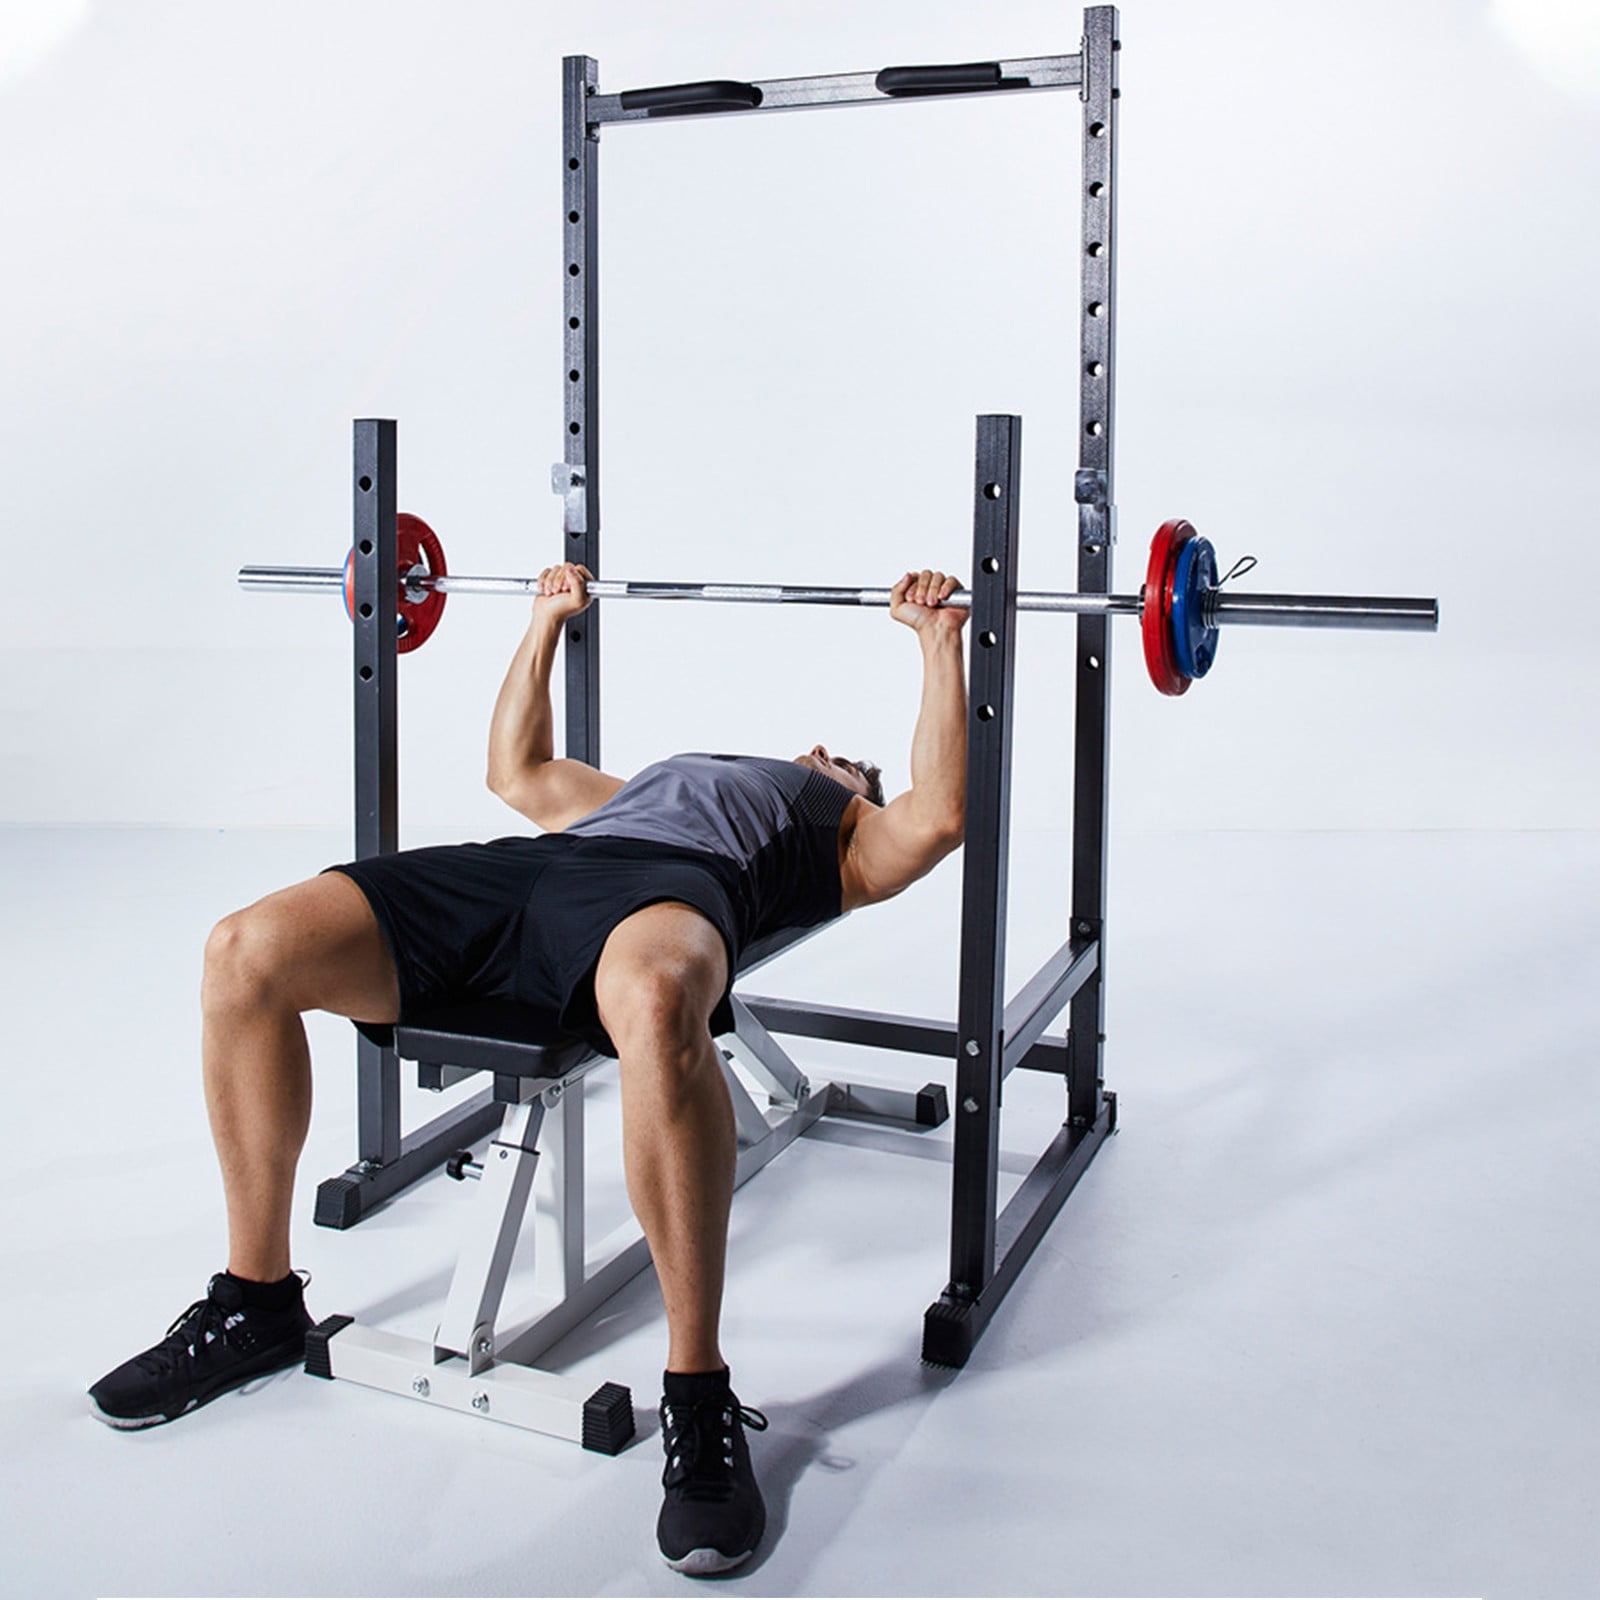 Details about   Half Frame Barbell Squat Rack Pull-Up Multi-Function Fitness Equipment Home USA 